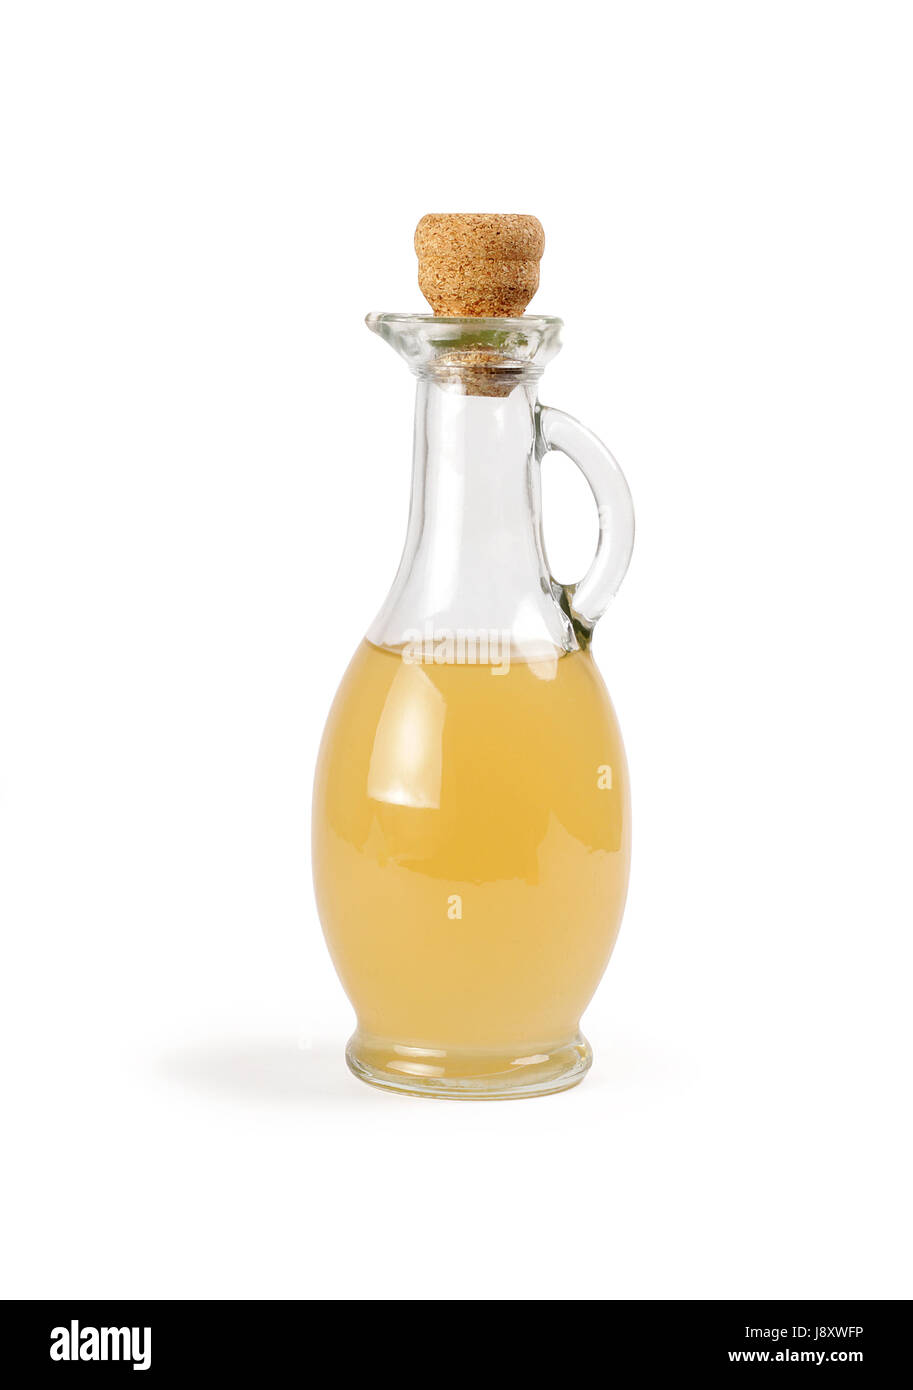 Decanter with apple vinegar isolated. Stock Photo